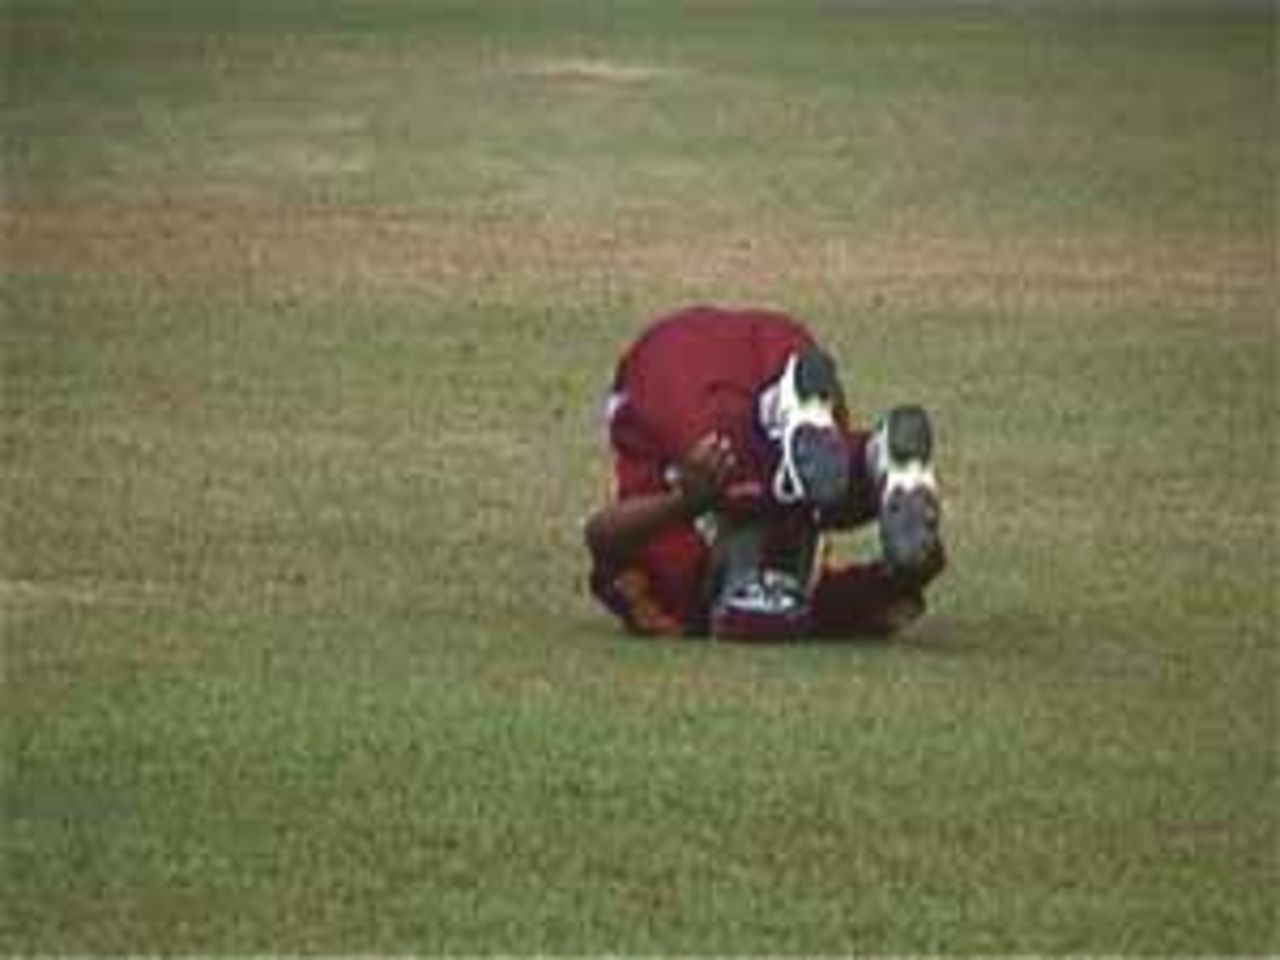 Lara stretching on the ground during the drinks interval, India v West Indies (Final), Coca-Cola Singapore Challenge, 1999-2000, Kallang Ground, Singapore, 7 Sep 1999.